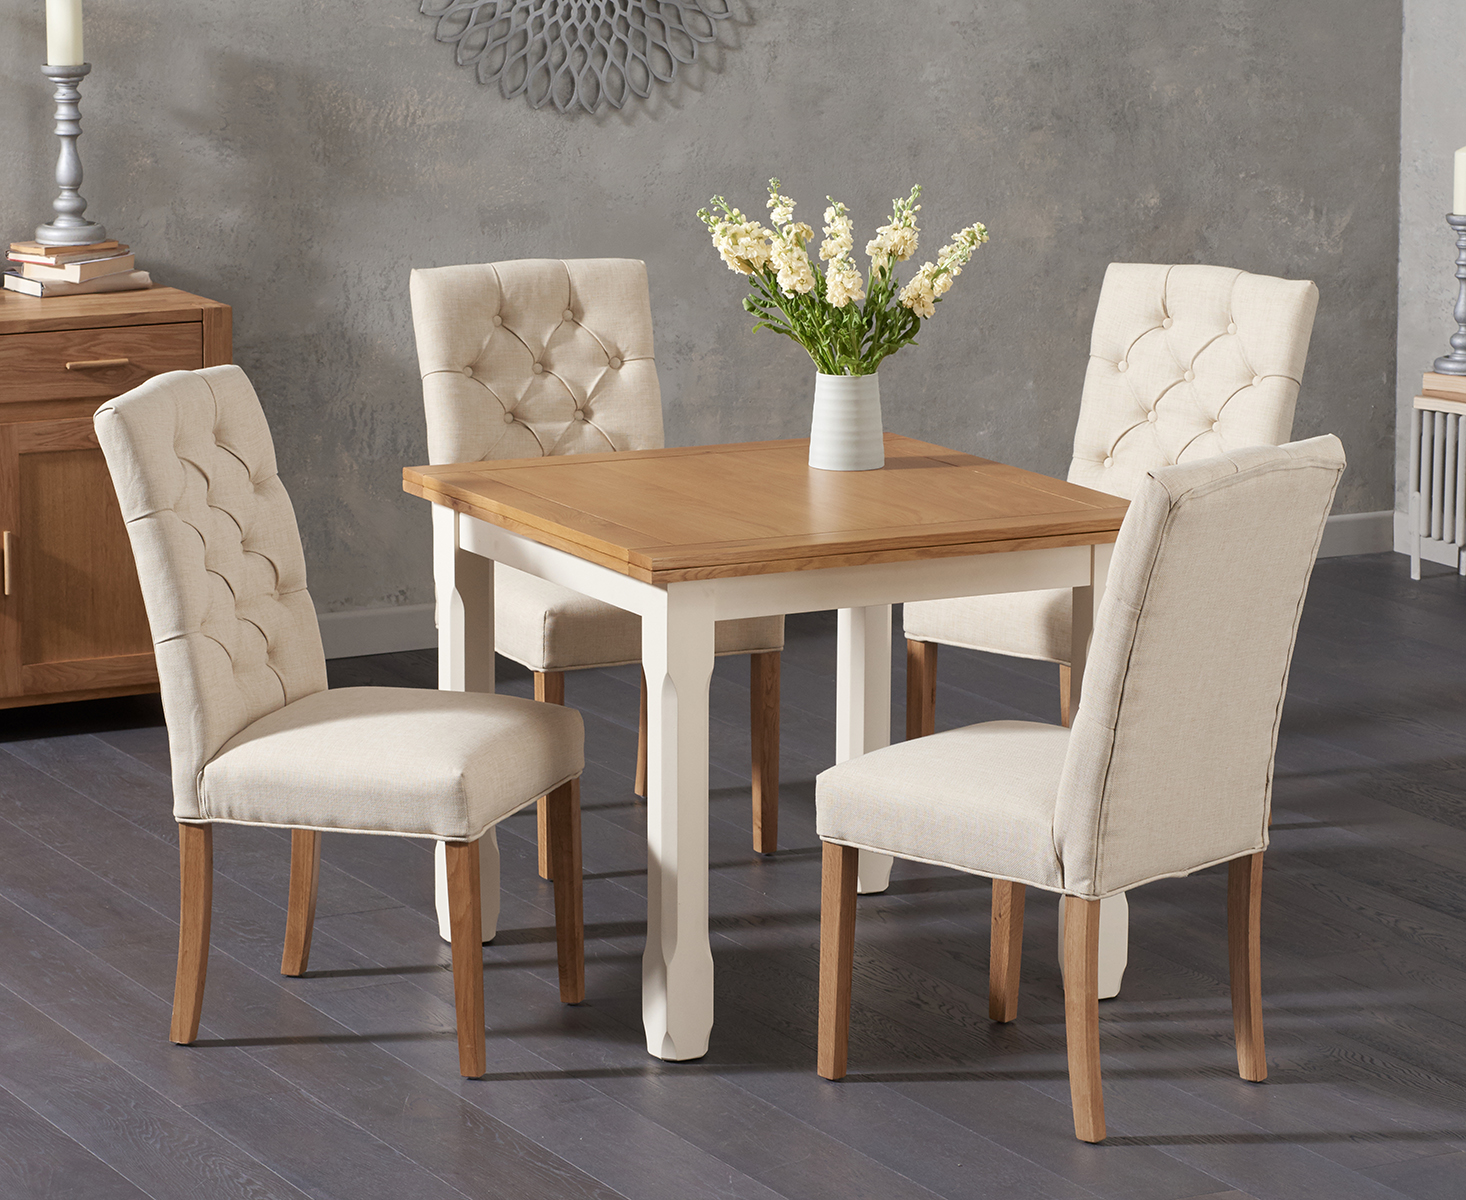 Somerset 90cm Flip Top Oak And Cream Painted Dining Table With 4 Cream Isabella Cream Fabric Chairs